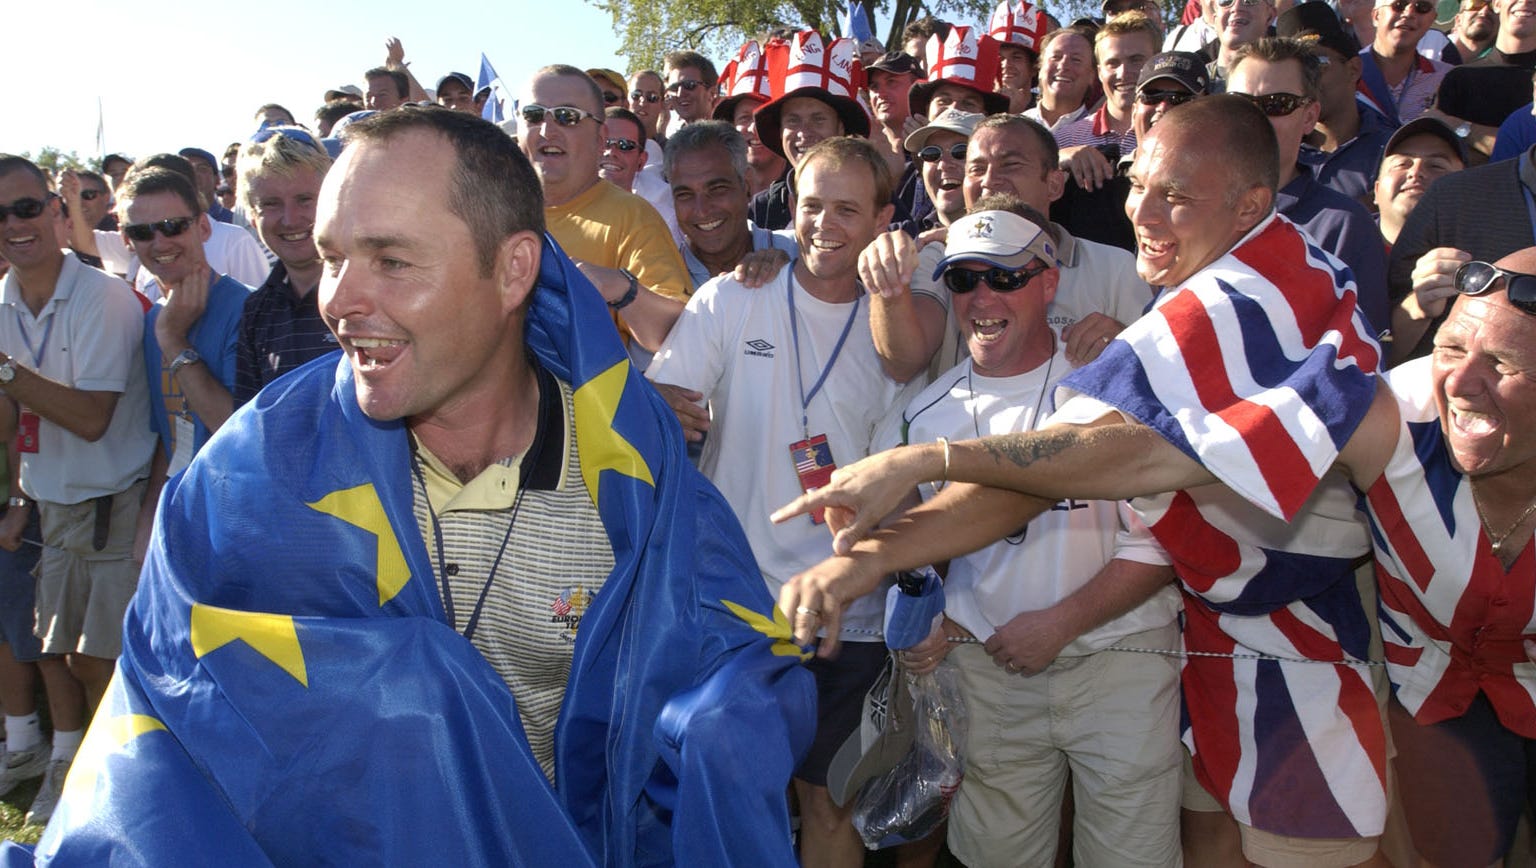 Billy Foster, Darren Clarke's caddie, is surrounded by European fans on the 18th hole at the 2004 Ryder Cup.